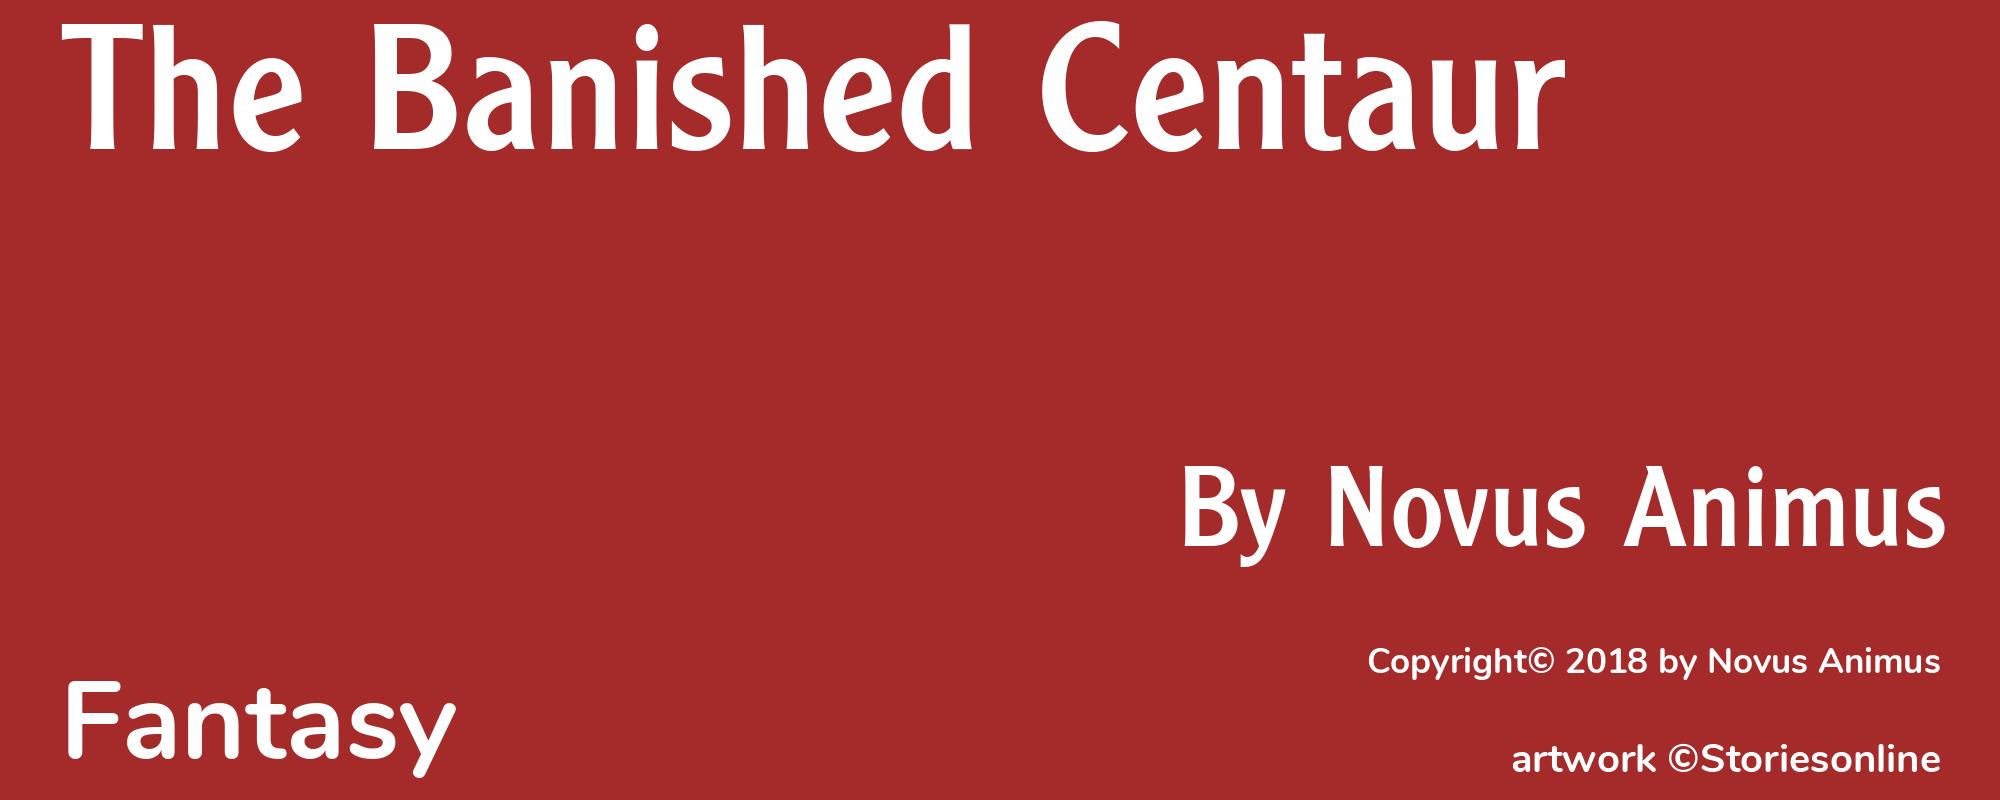 The Banished Centaur - Cover